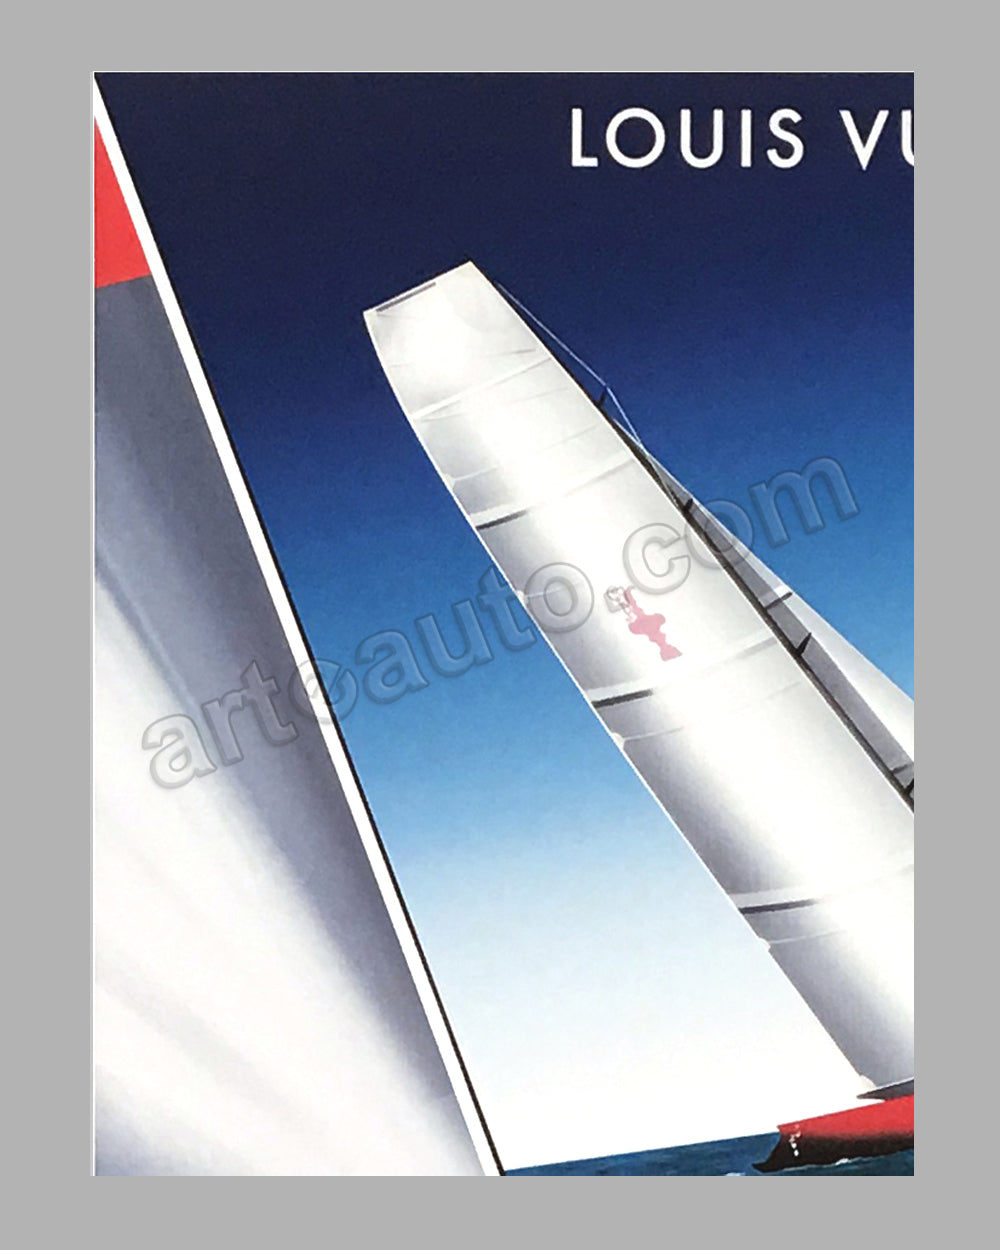 Louis Vuitton, Other, Louis Vuitton Cup Poster Picture Frame